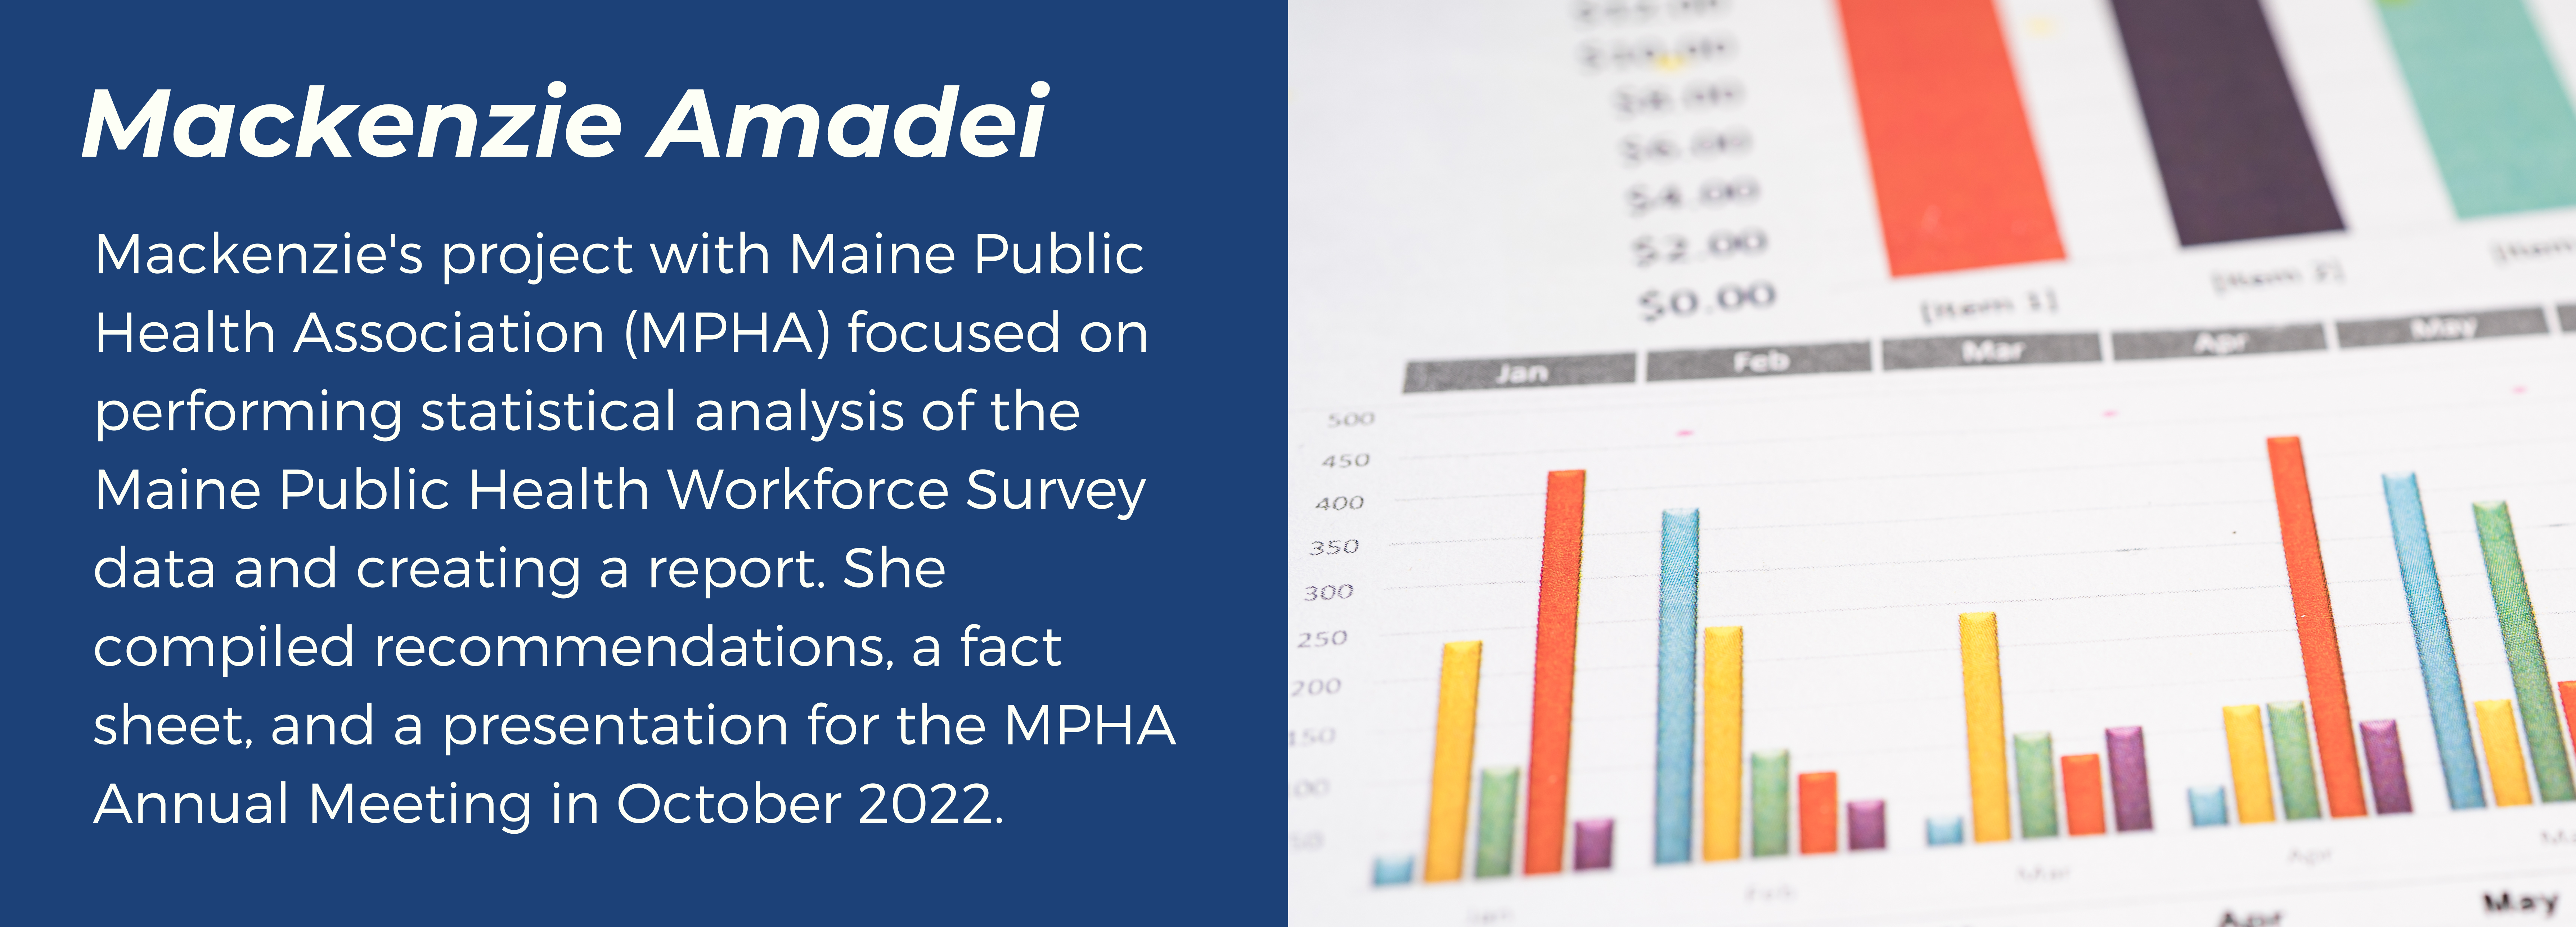 Mackenzie Amadei-Mackenzie's project with Maine Public Health Association (MPHA) focused on performing statistical analysis of the Maine Public Health Workforce Survey data and creating a report. She compiled recommendations, a fact sheet, and a presentation for the MPHA Annual Meeting in October 2022. This slide includes an image of charts and graphs on a page.